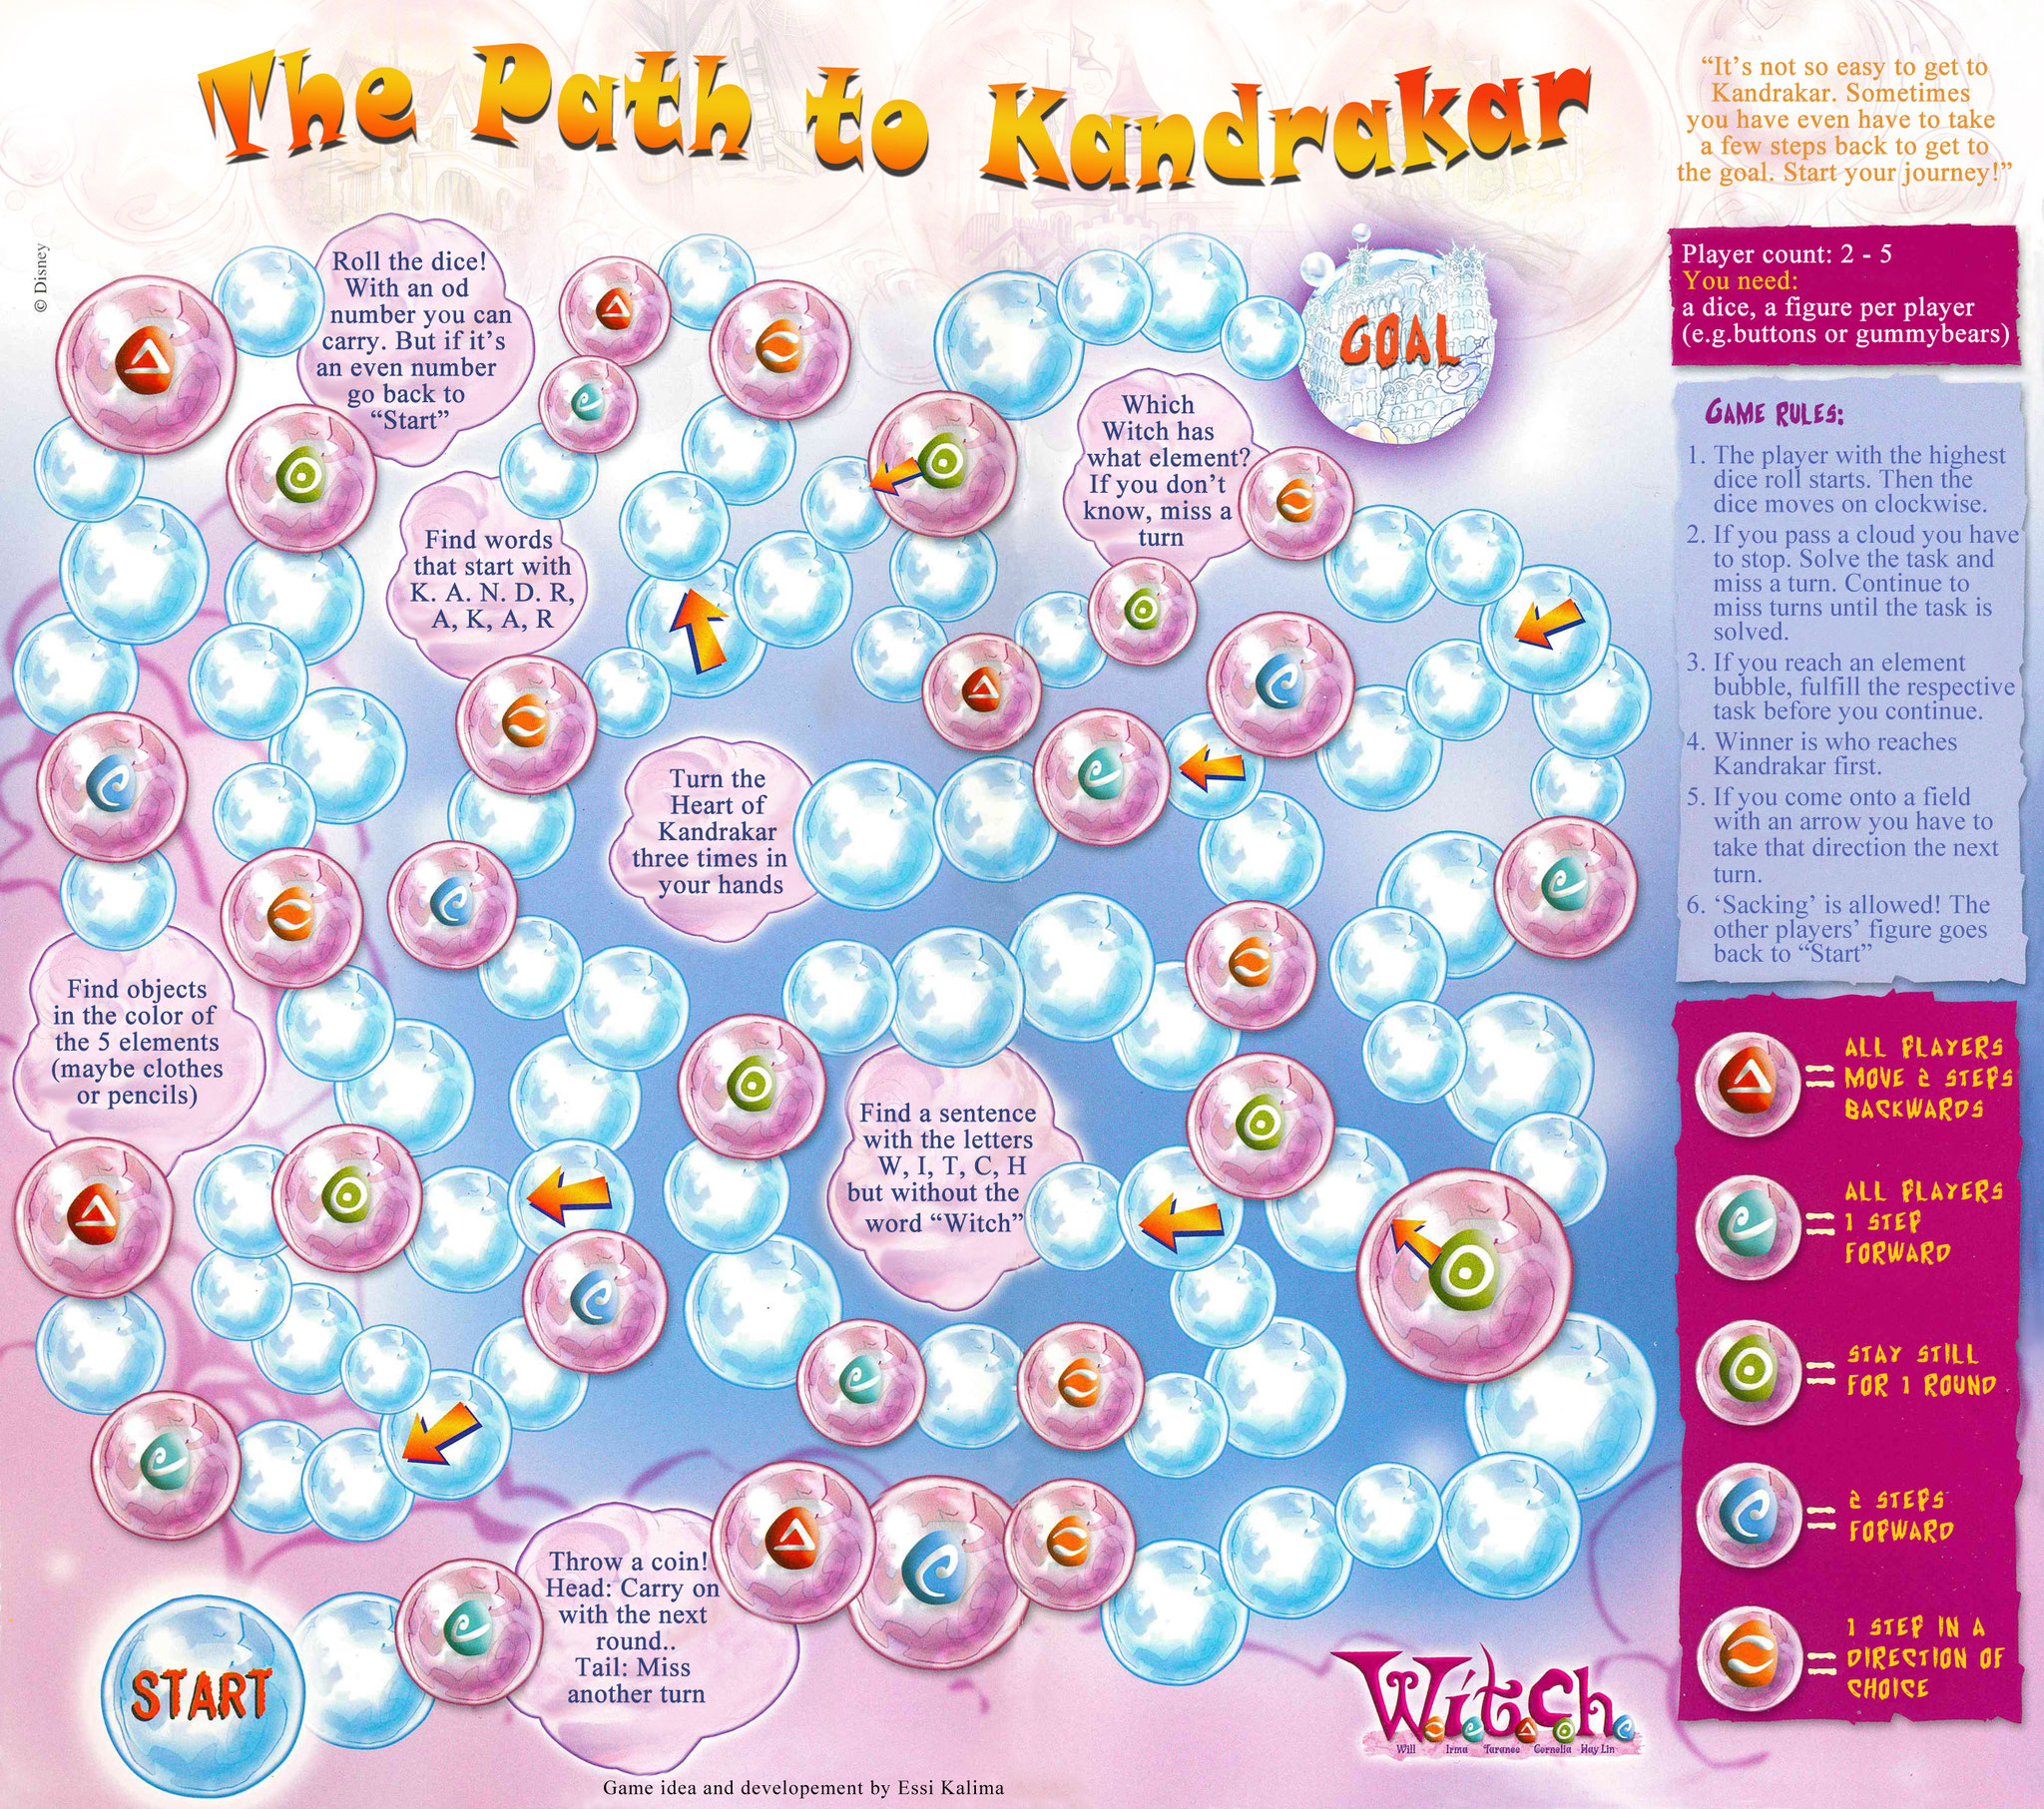 Boardgame from the W.i.t.c.h. Magazine "The Path to Kandrakar"